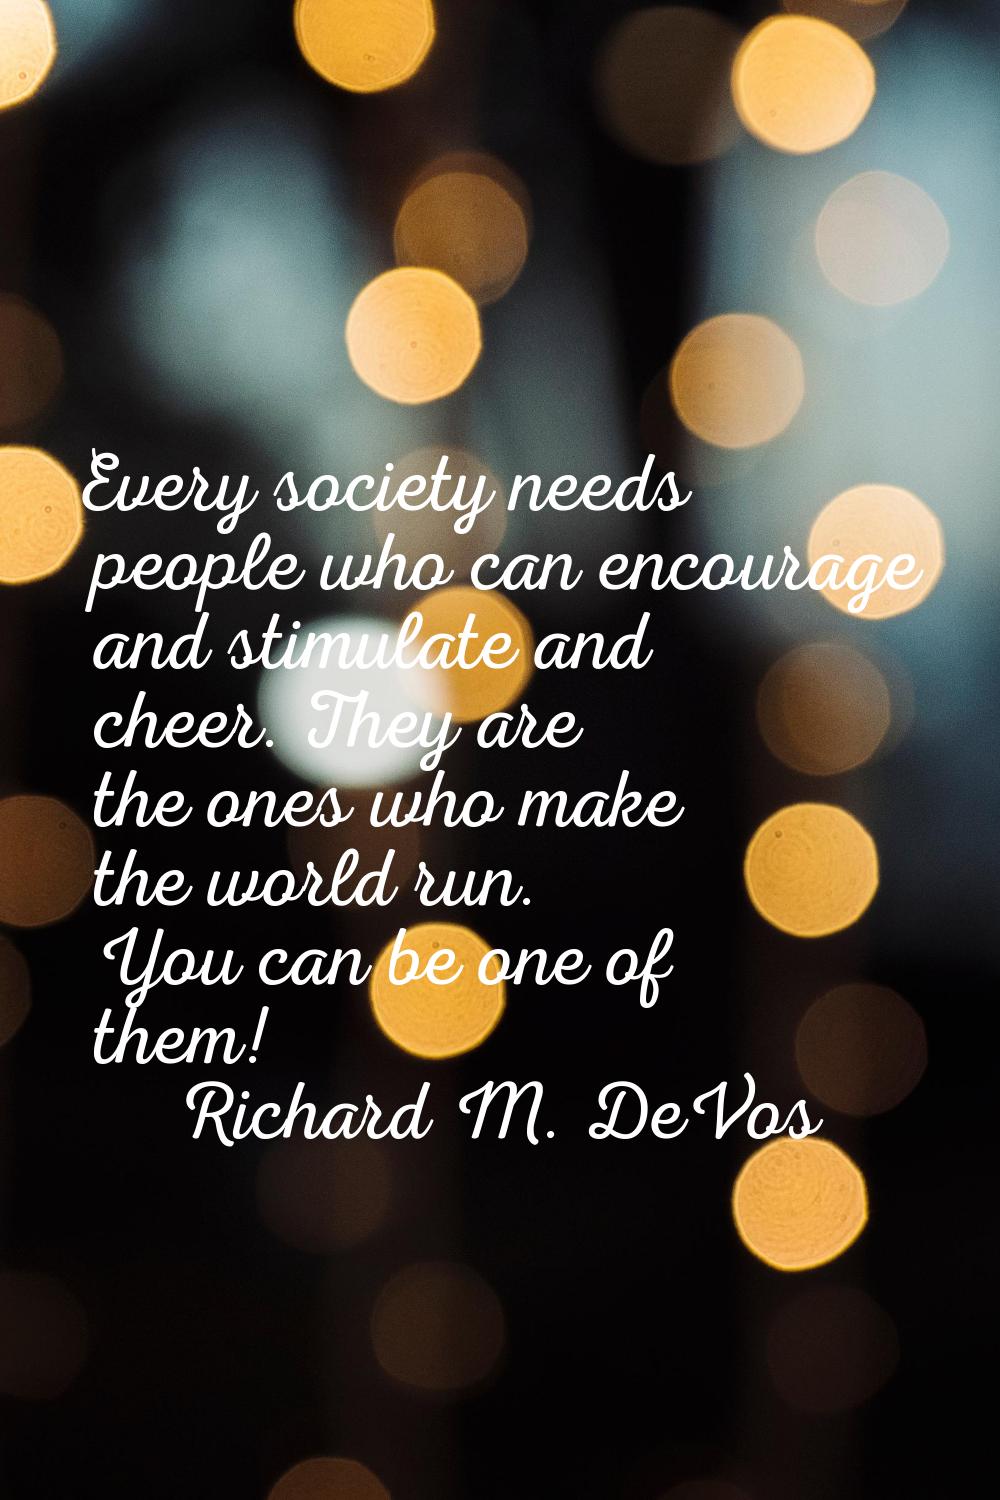 Every society needs people who can encourage and stimulate and cheer. They are the ones who make th